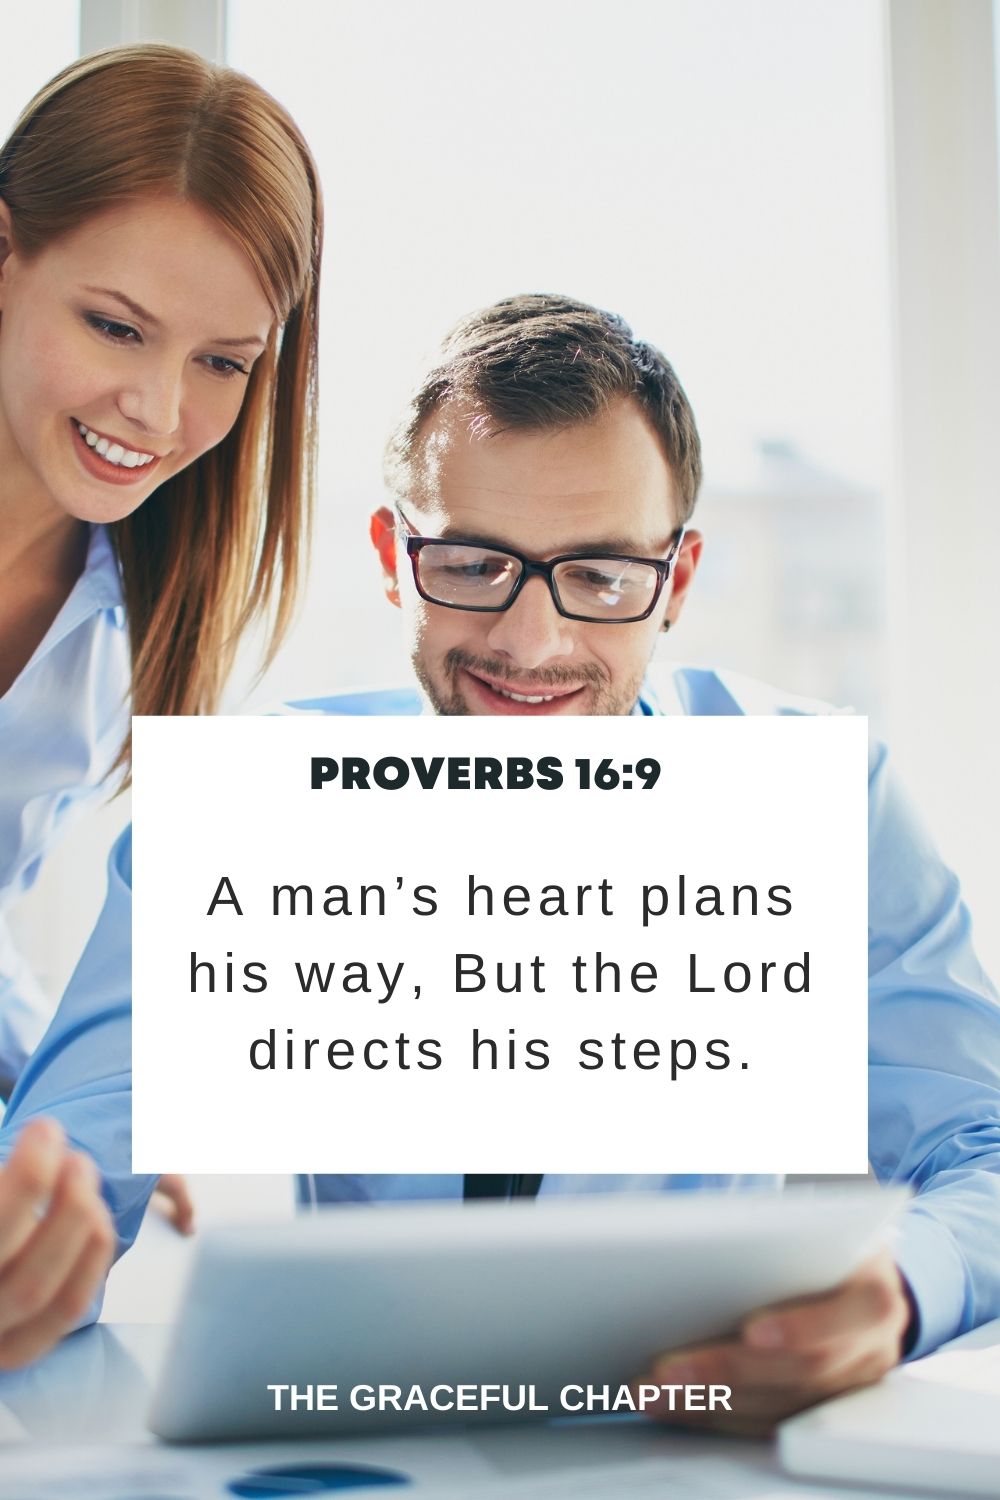 A man’s heart plans his way, But the Lord directs his steps. Proverbs 16:9